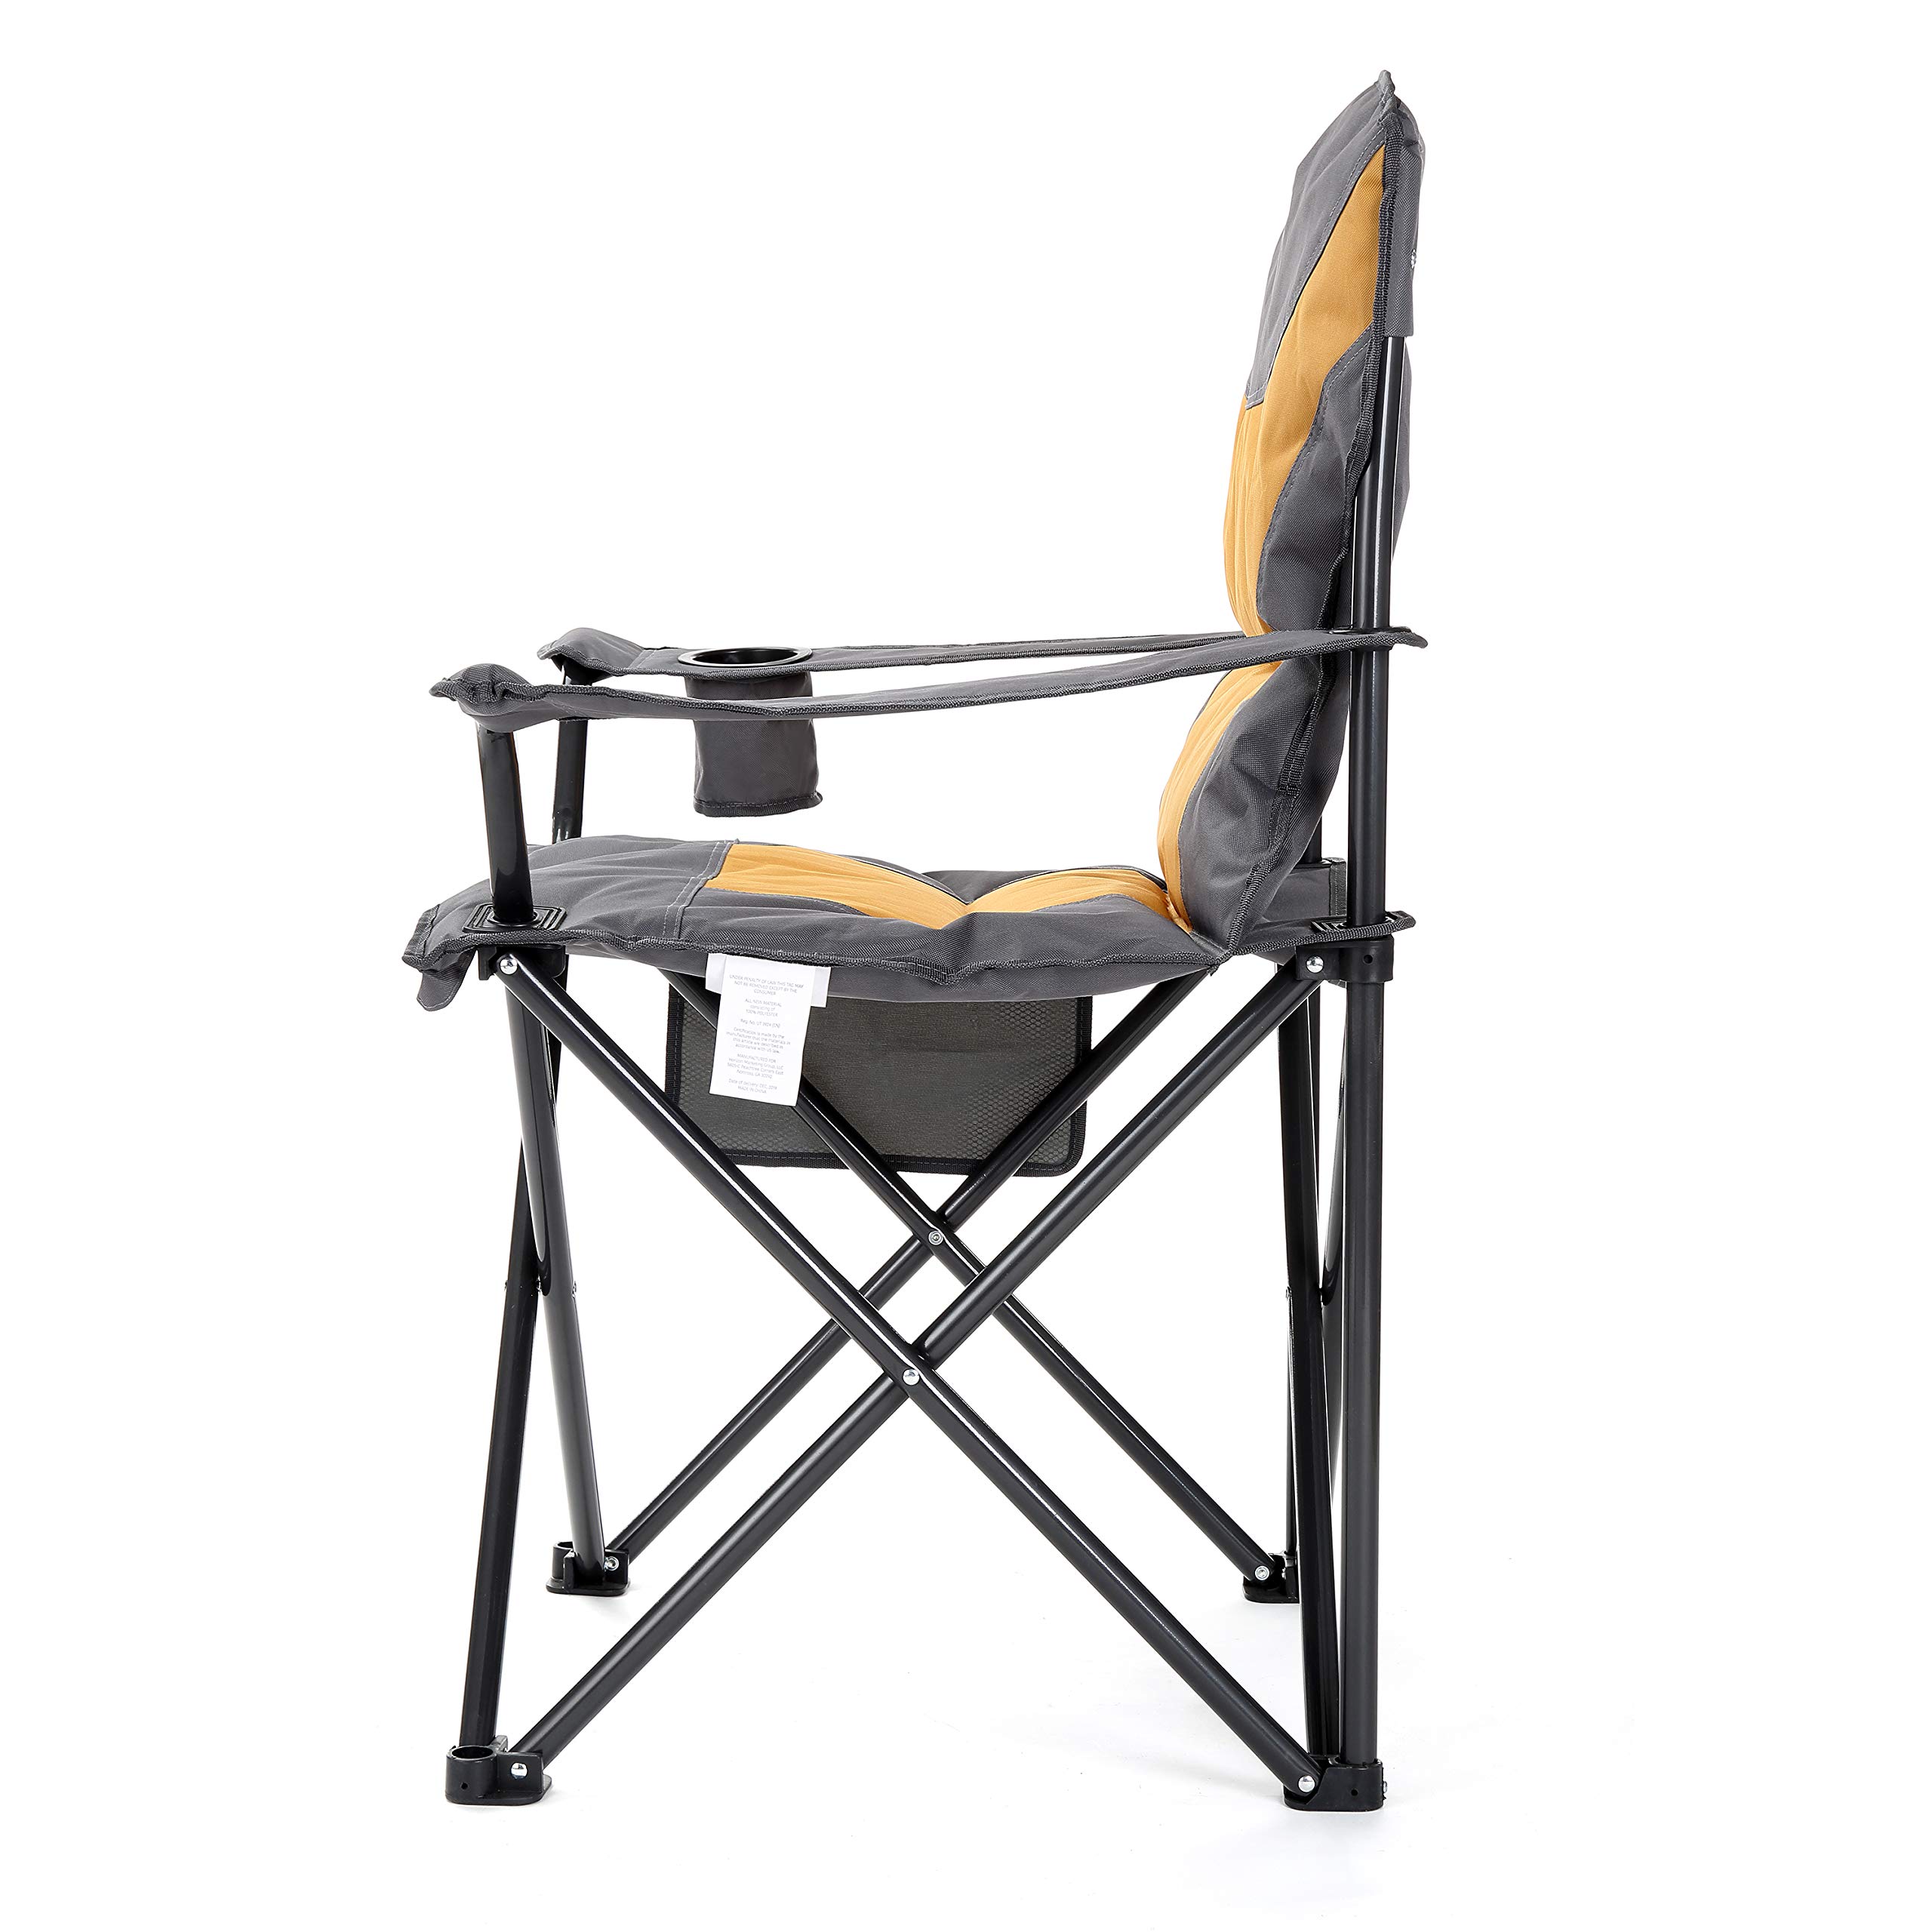 Mua ARROWHEAD OUTDOOR Portable Folding Camping Quad Chair w/Added Ultra-Comfortable  Padding, Cup-Holder, Heavy-Duty Carrying Bag, Padded Armrests, Supports up  to 330lbs, USA-Based Support (Tan  Gray) trên Amazon Mỹ chính hãng 2023